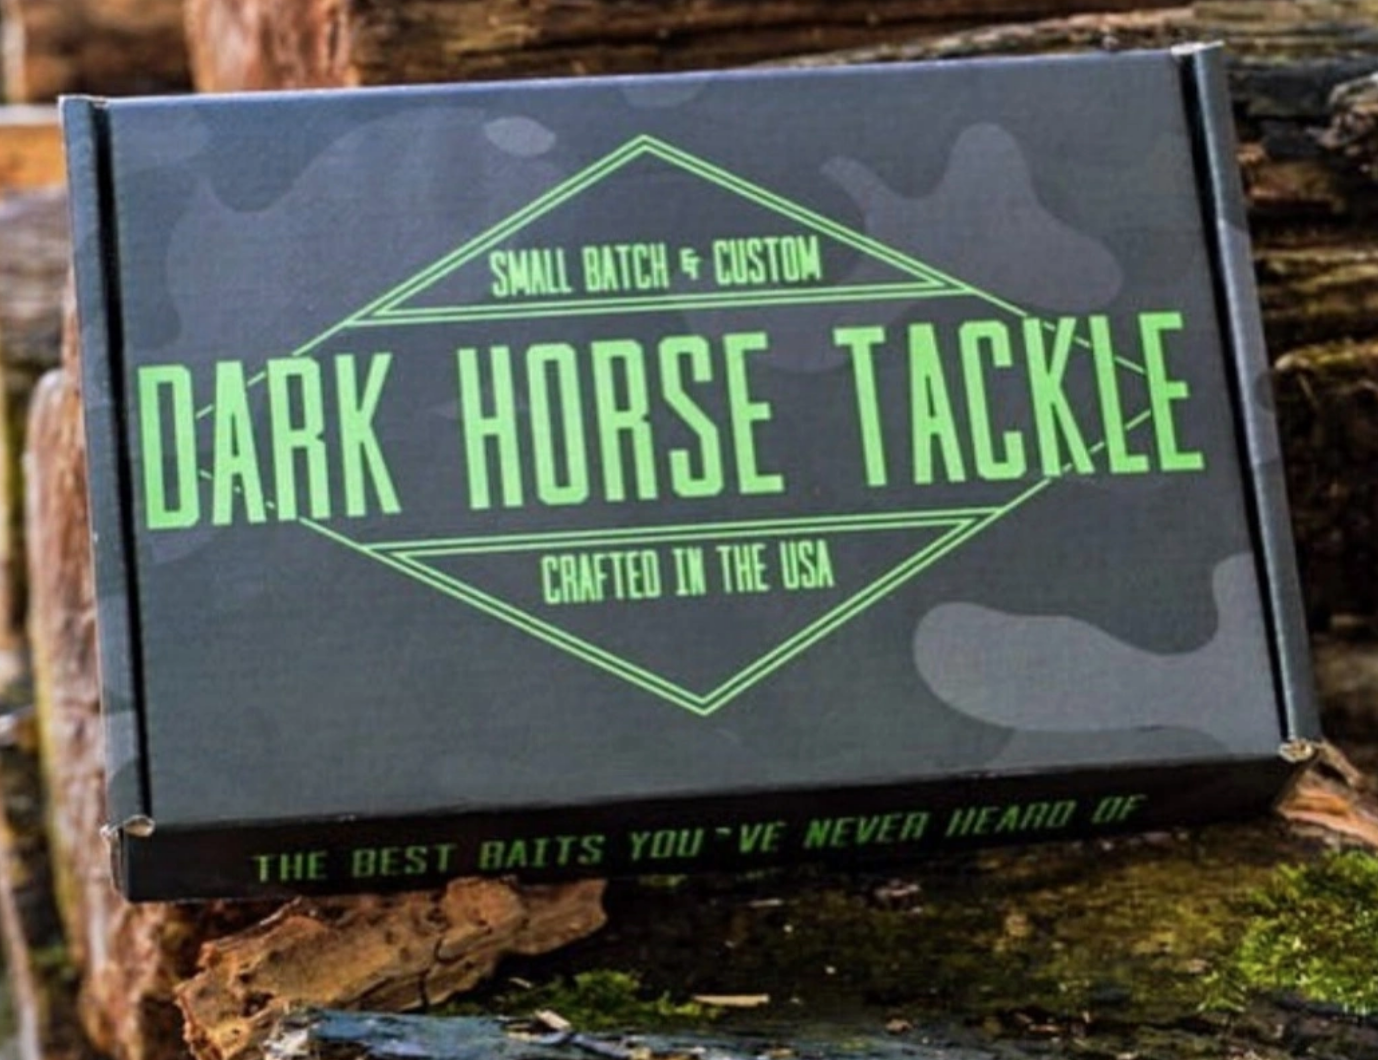 Weekend Warrior Box by Dark Horse Tackle Reviews: Get All The Details At  Hello Subscription!